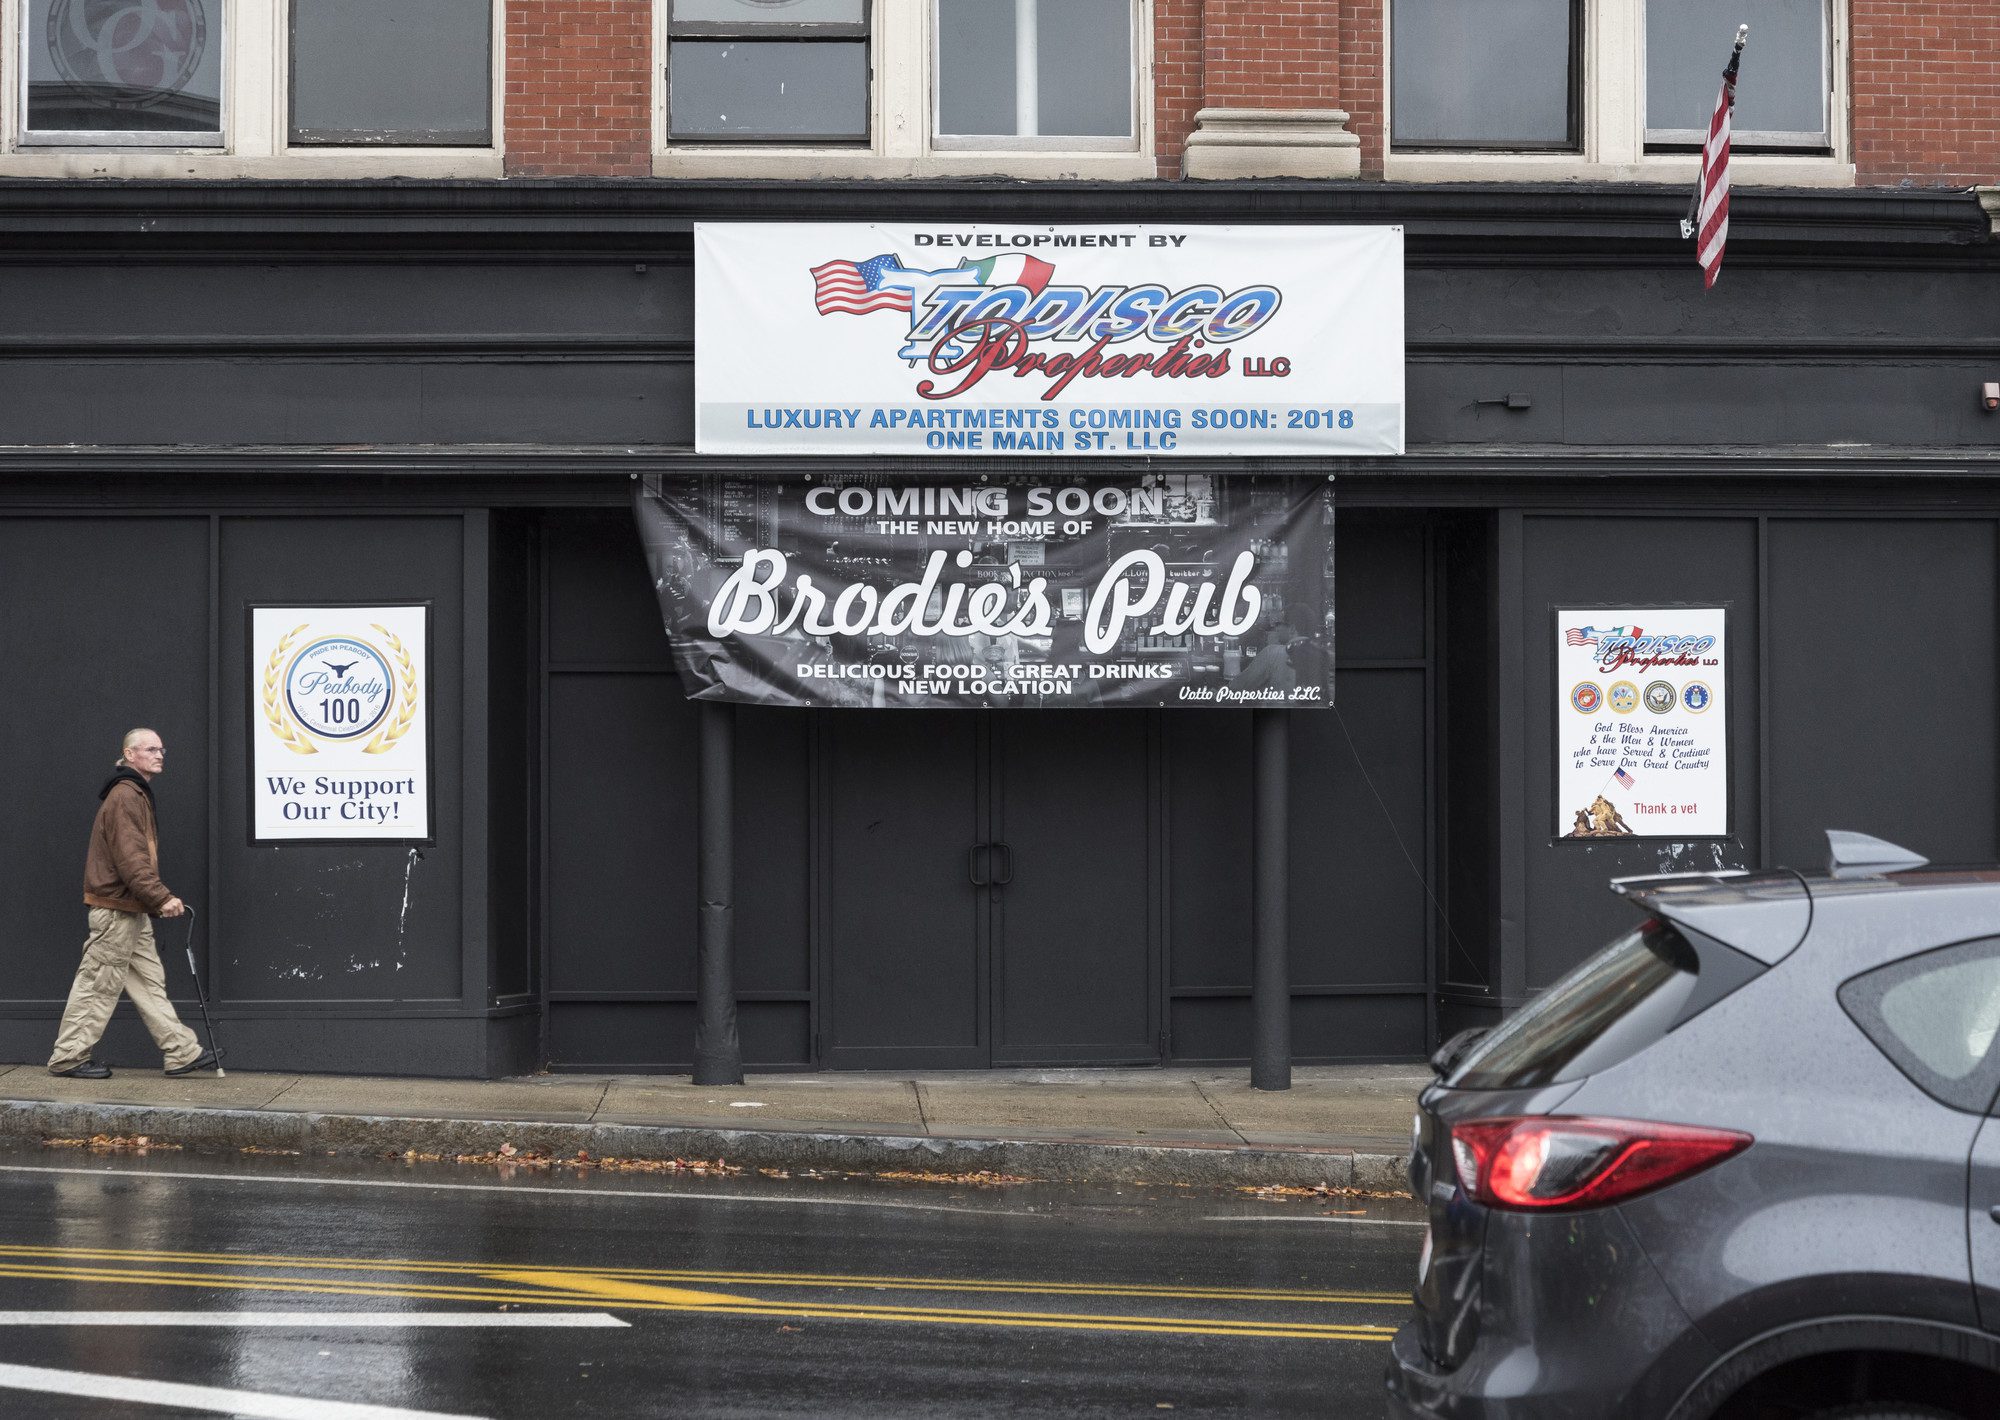 A pedestrian walks past the future site of Brodie's Pub on Main Street in Peabody.